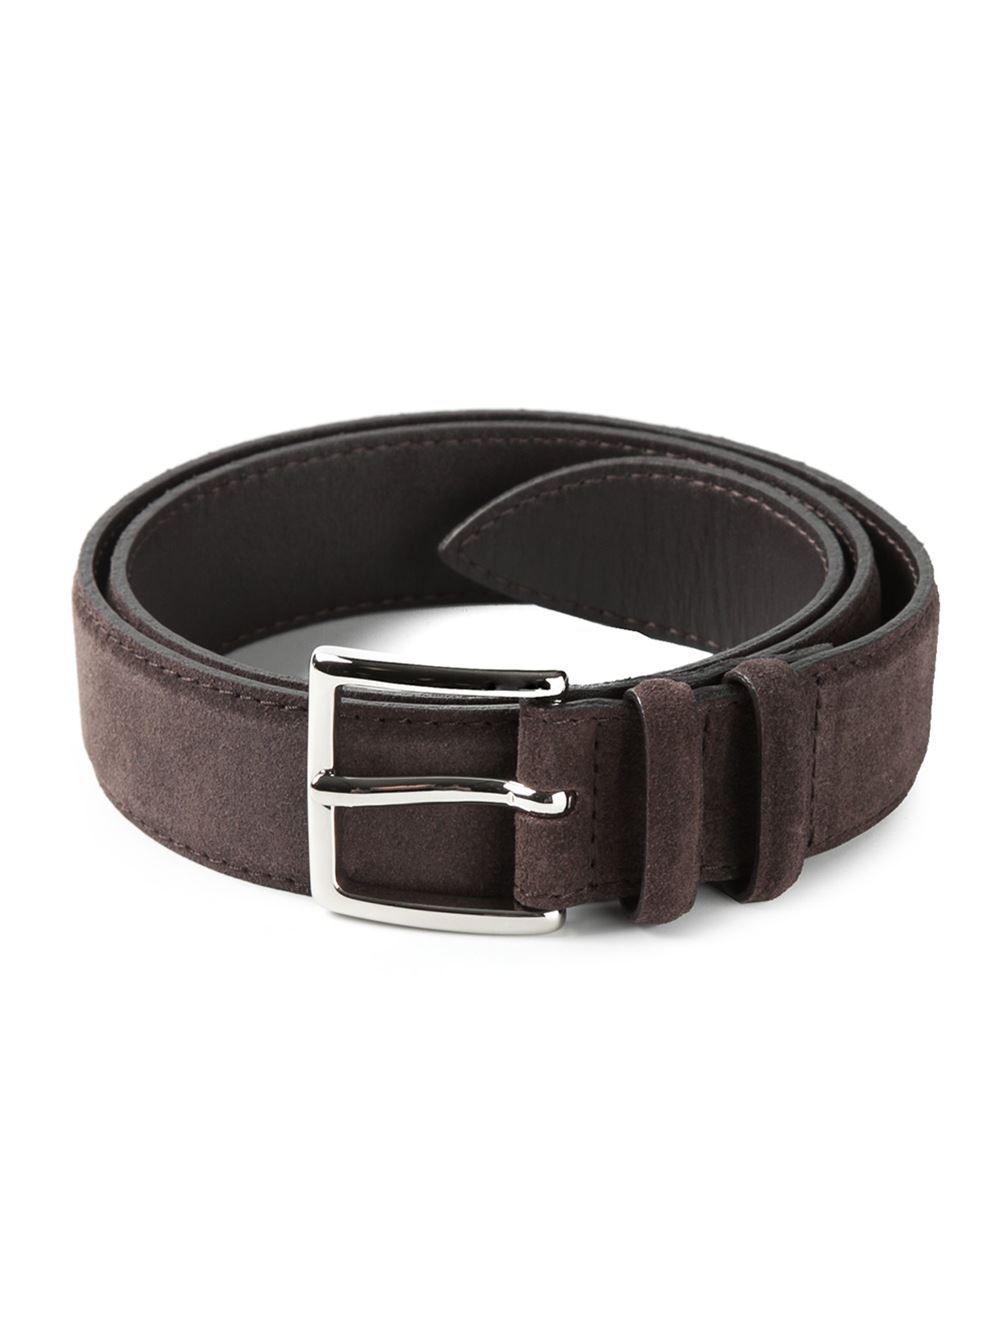 Orciani Suede Belt in Brown for Men | Lyst